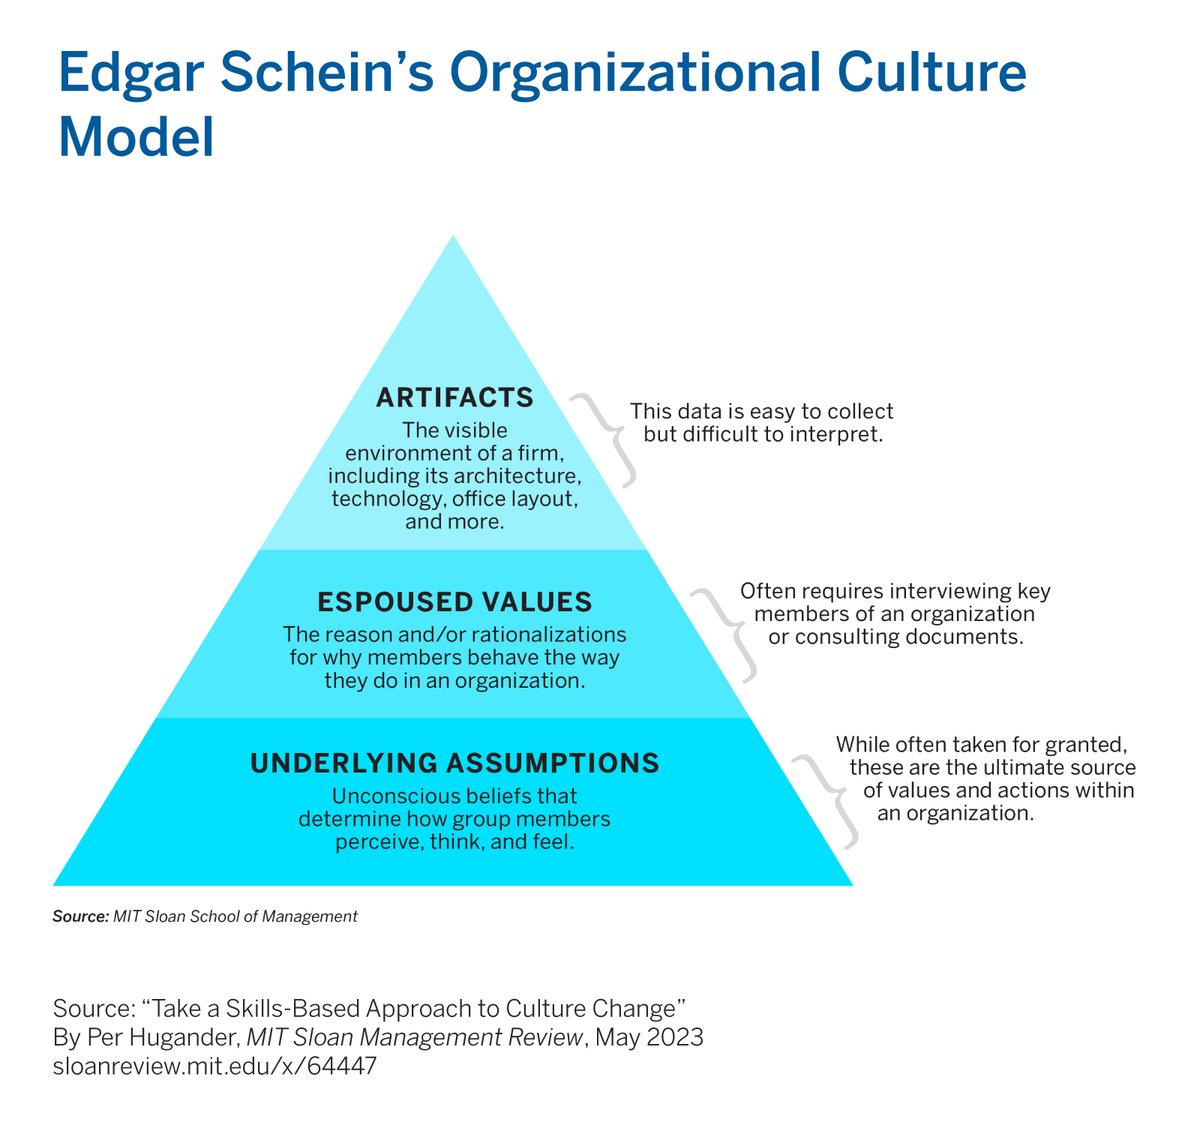 Underlying assumptions are the foundation of organizational culture, driving the values that, in turn, drive behavior. Learn more: mitsmr.com/431axPO